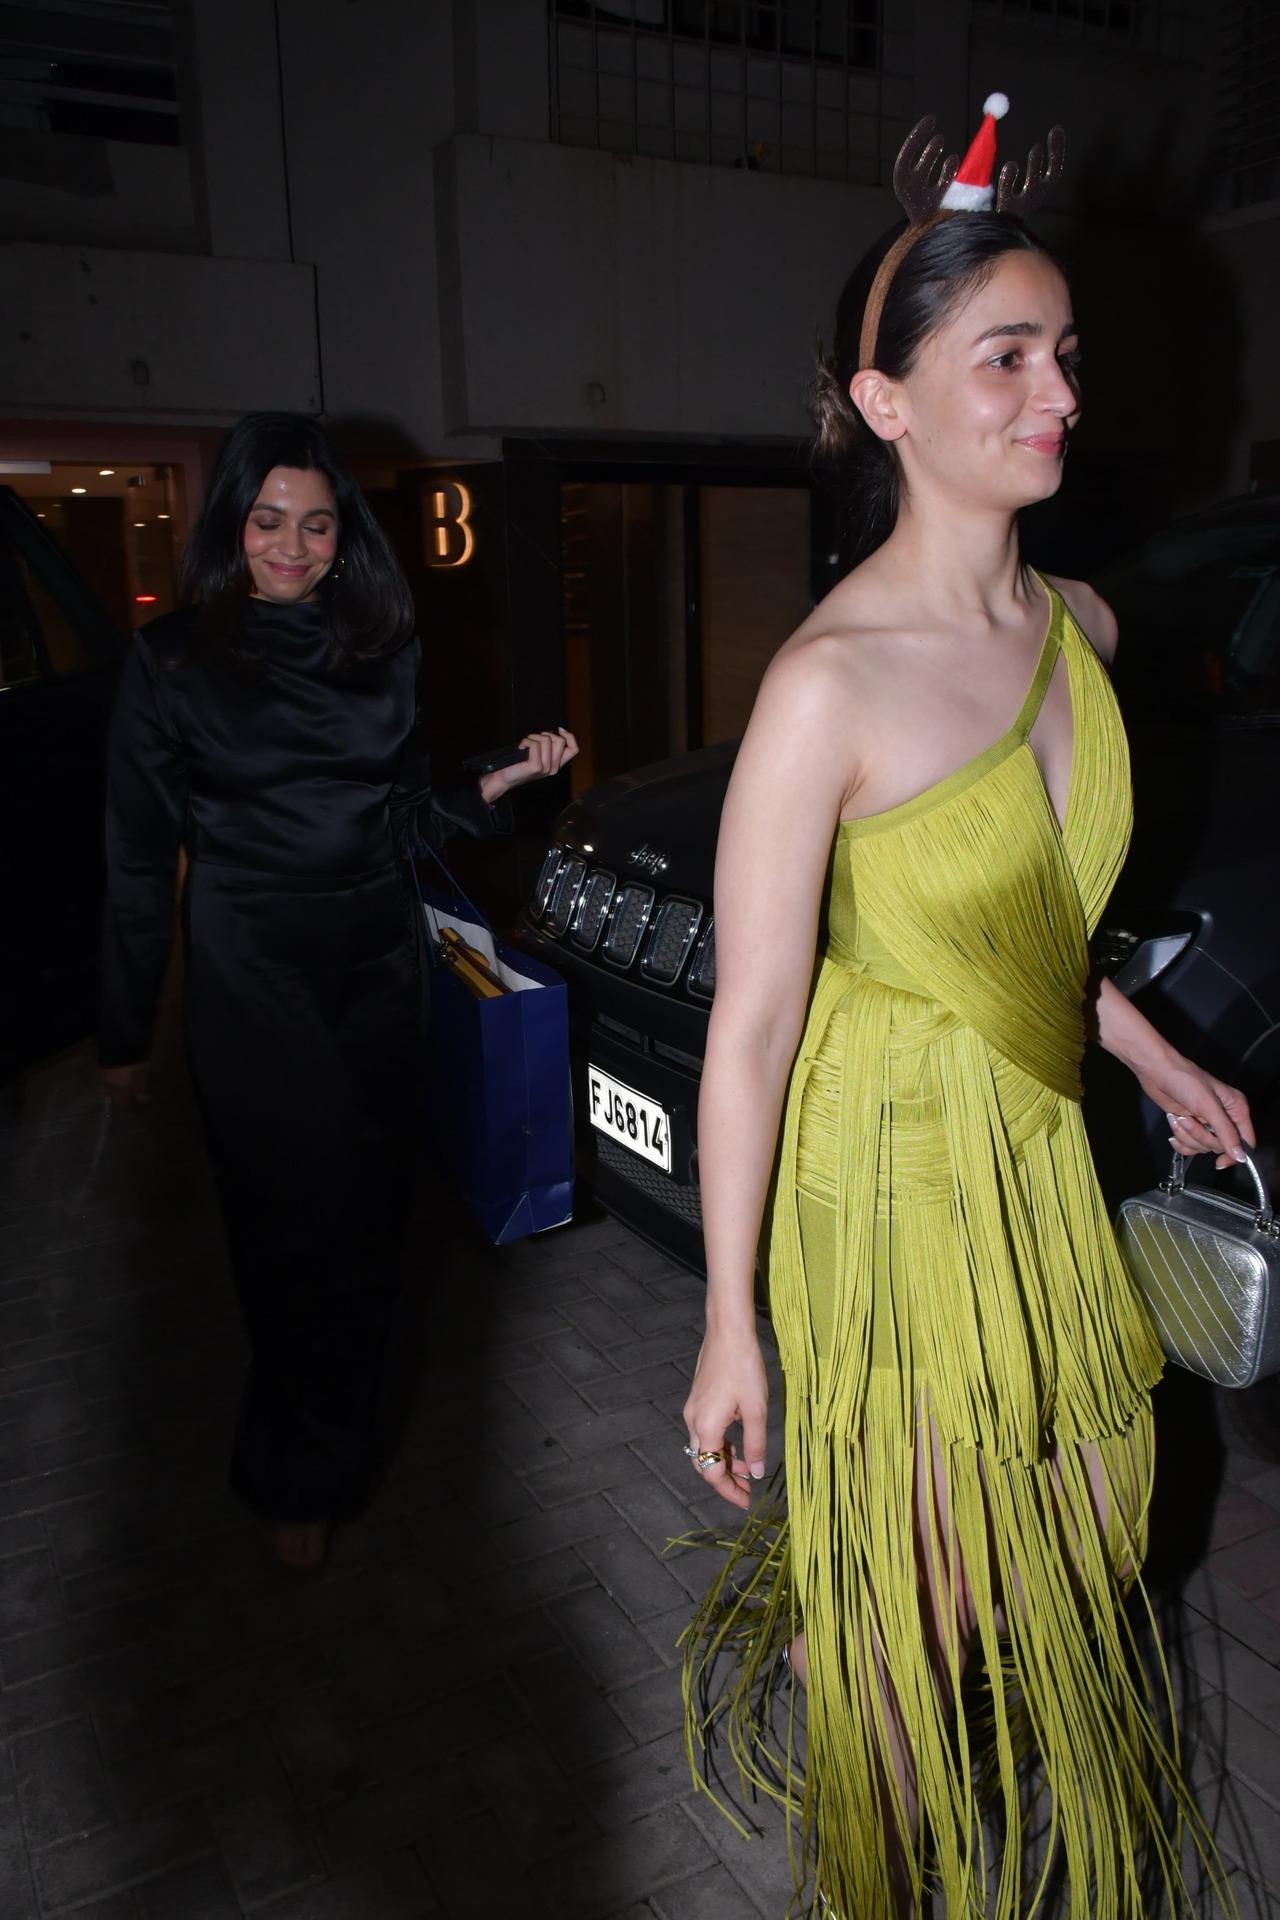 Bhatt sisters Shaheen and Alia step out together for dinner party at their father's house. While Shaheen looked stunning in a black dress, Alia went for a neon green dress